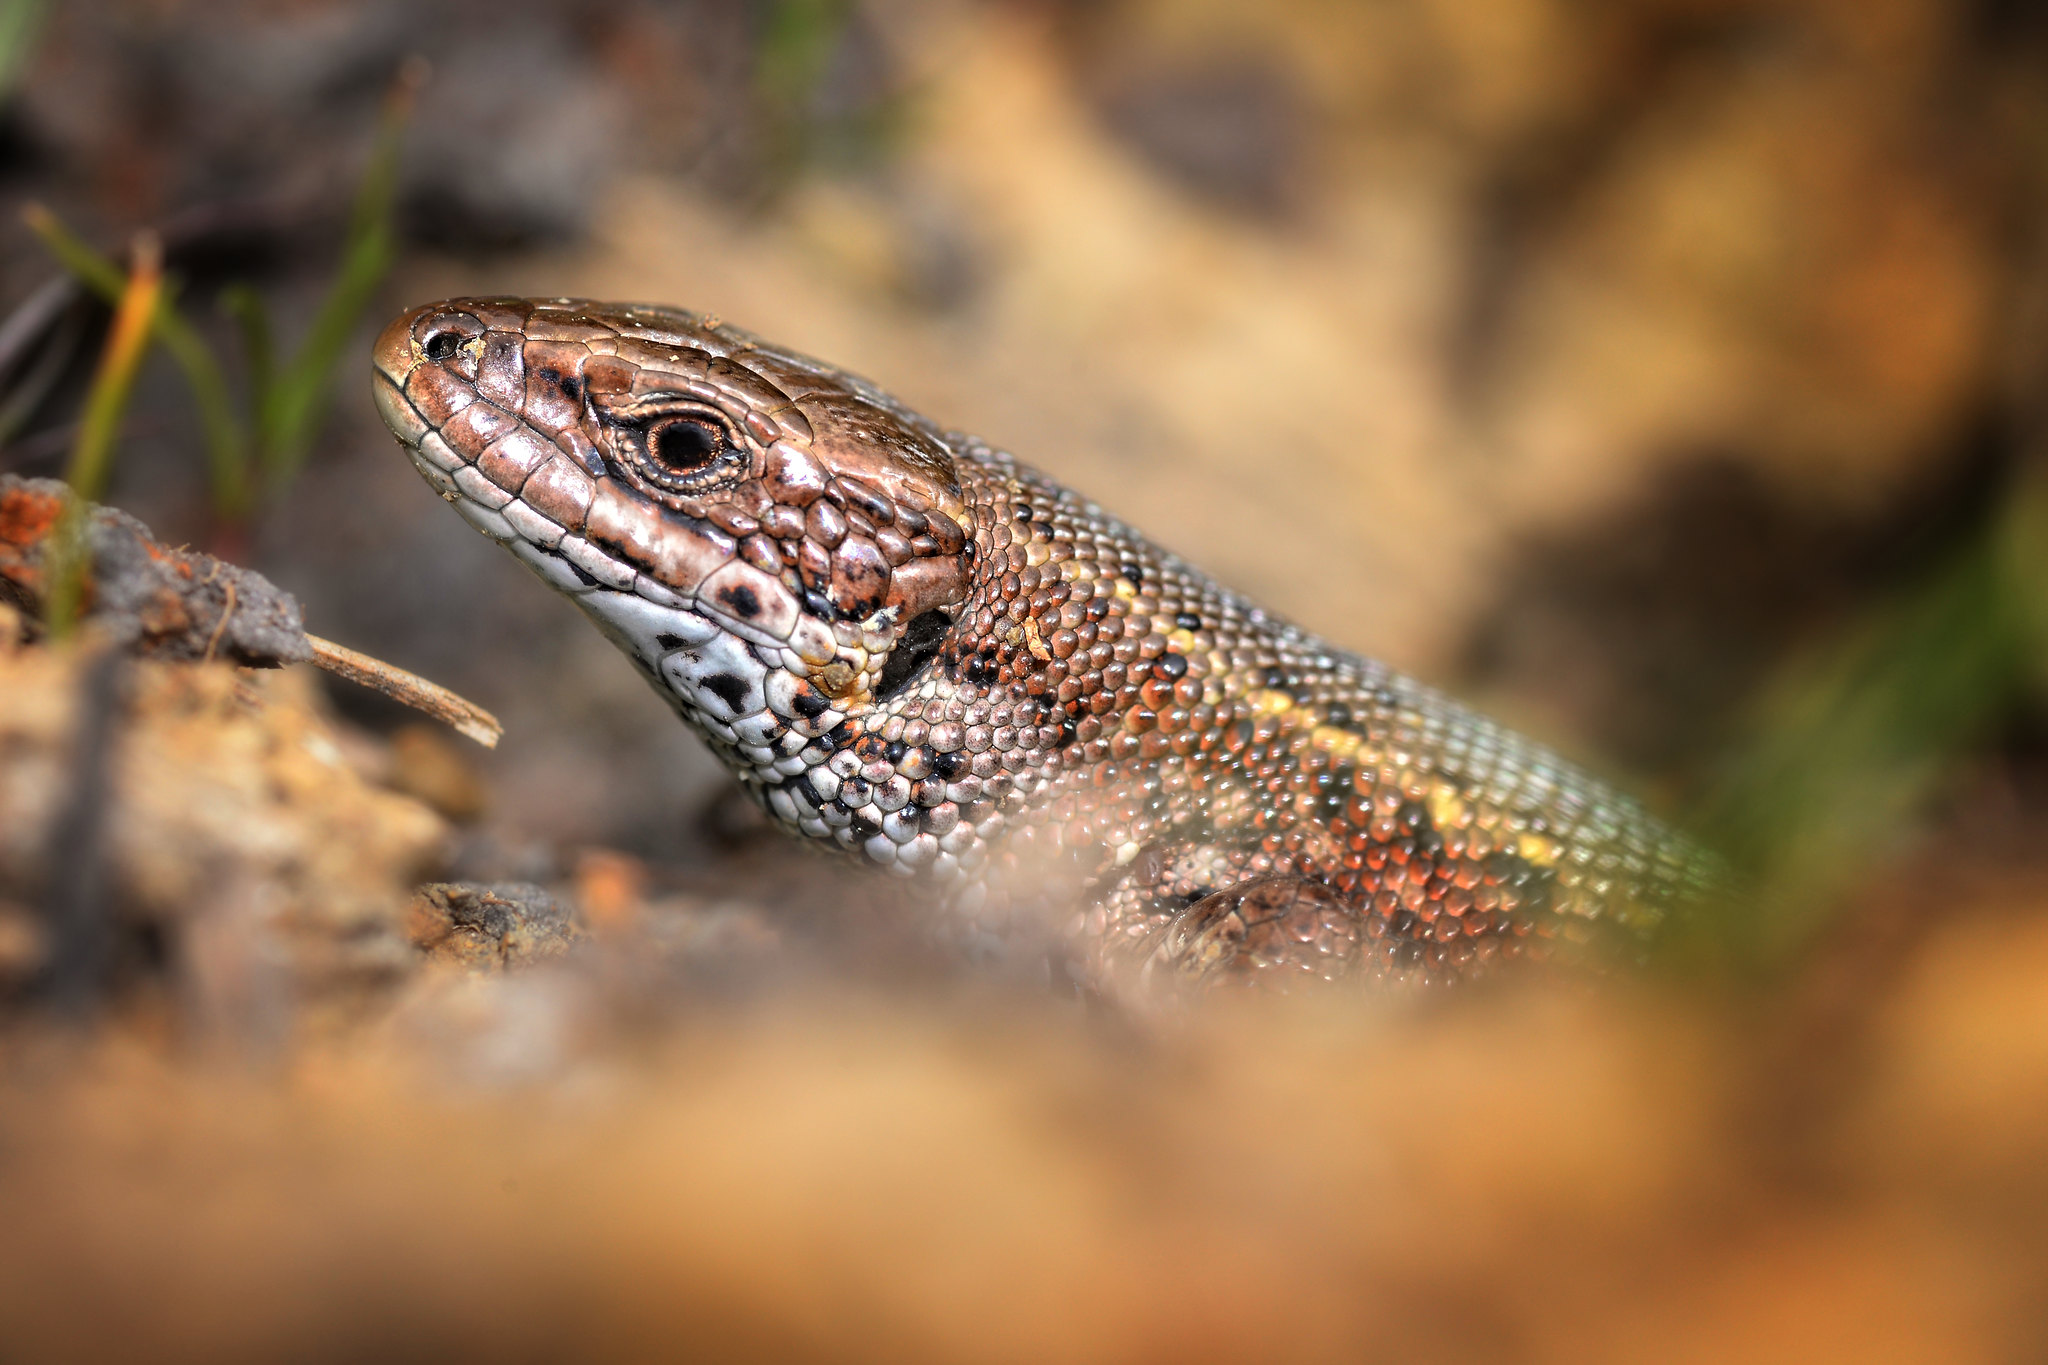 Could native lizards be born “old” as the climate warms? – Expert Reaction